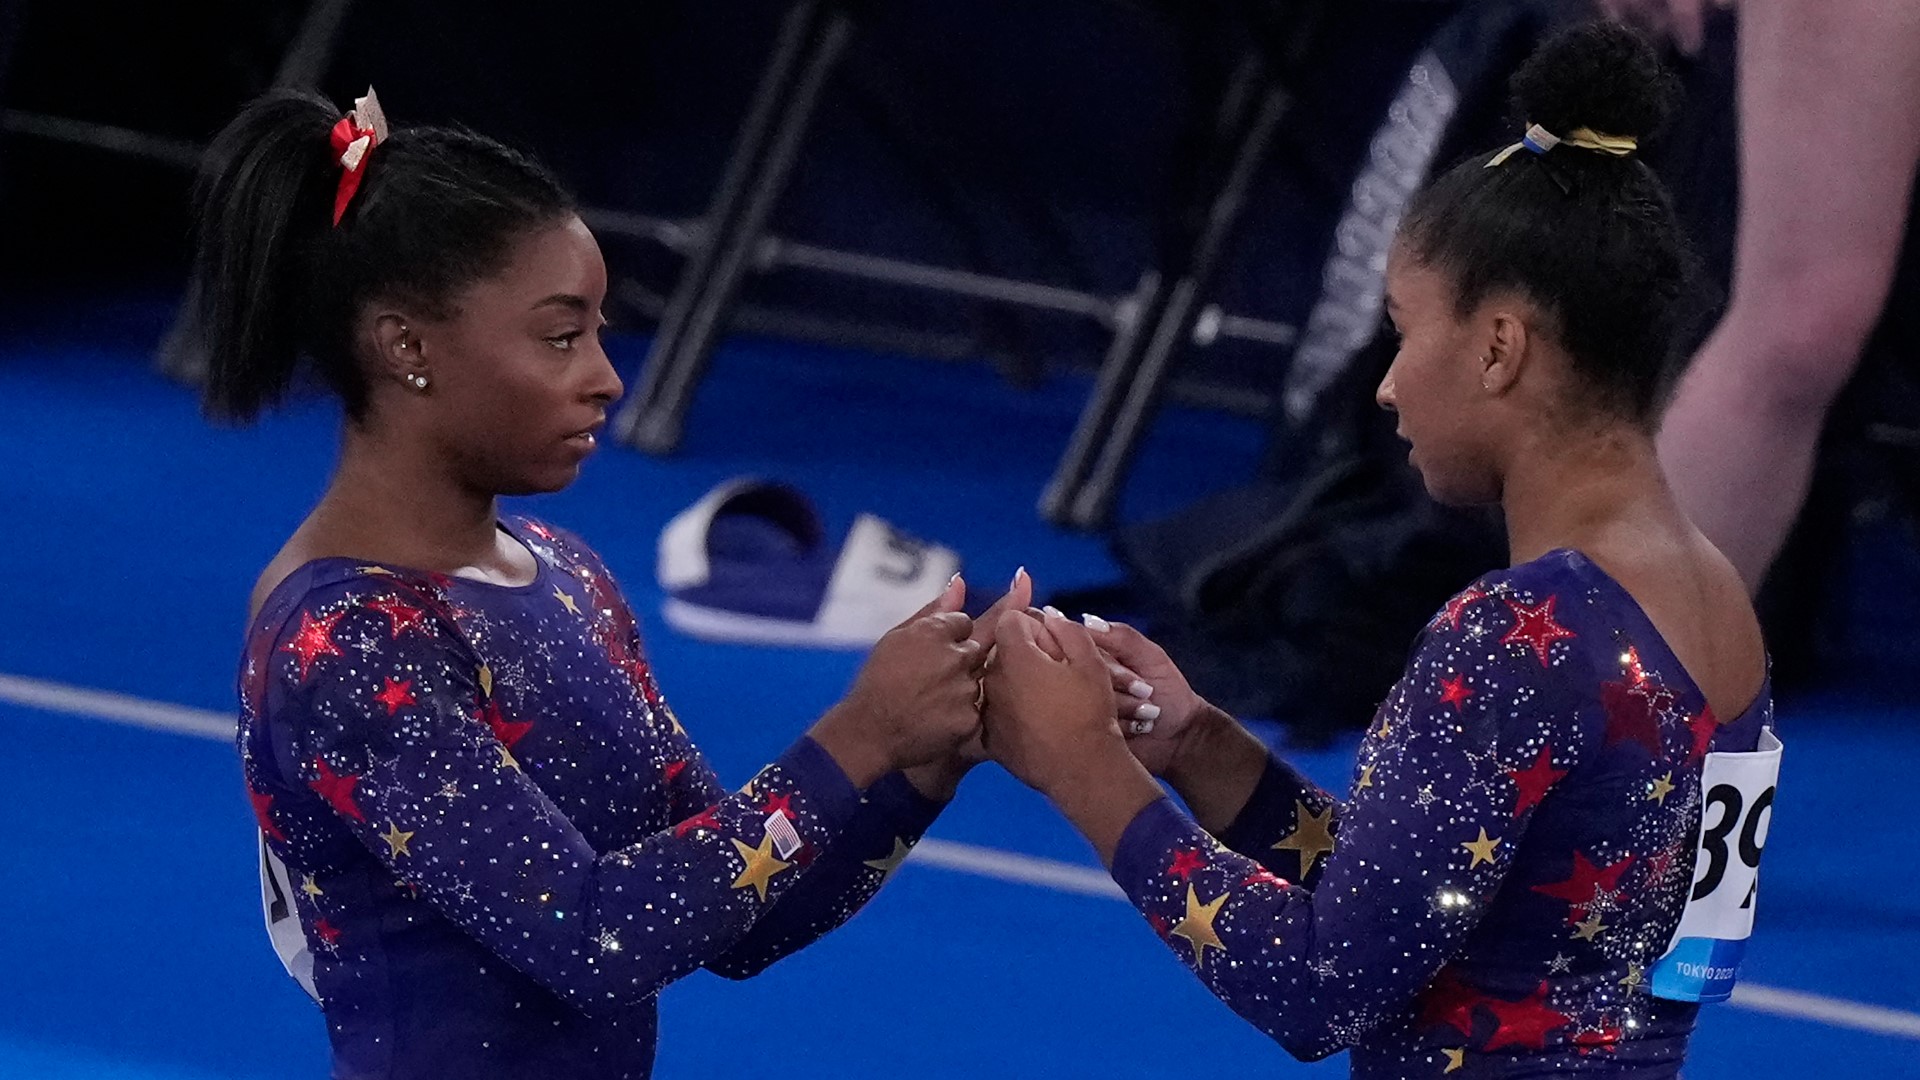 Simone Biles and her squad trail the team representing the Russian Olympic Committee heading into Tuesday's women's gymnastics team final.